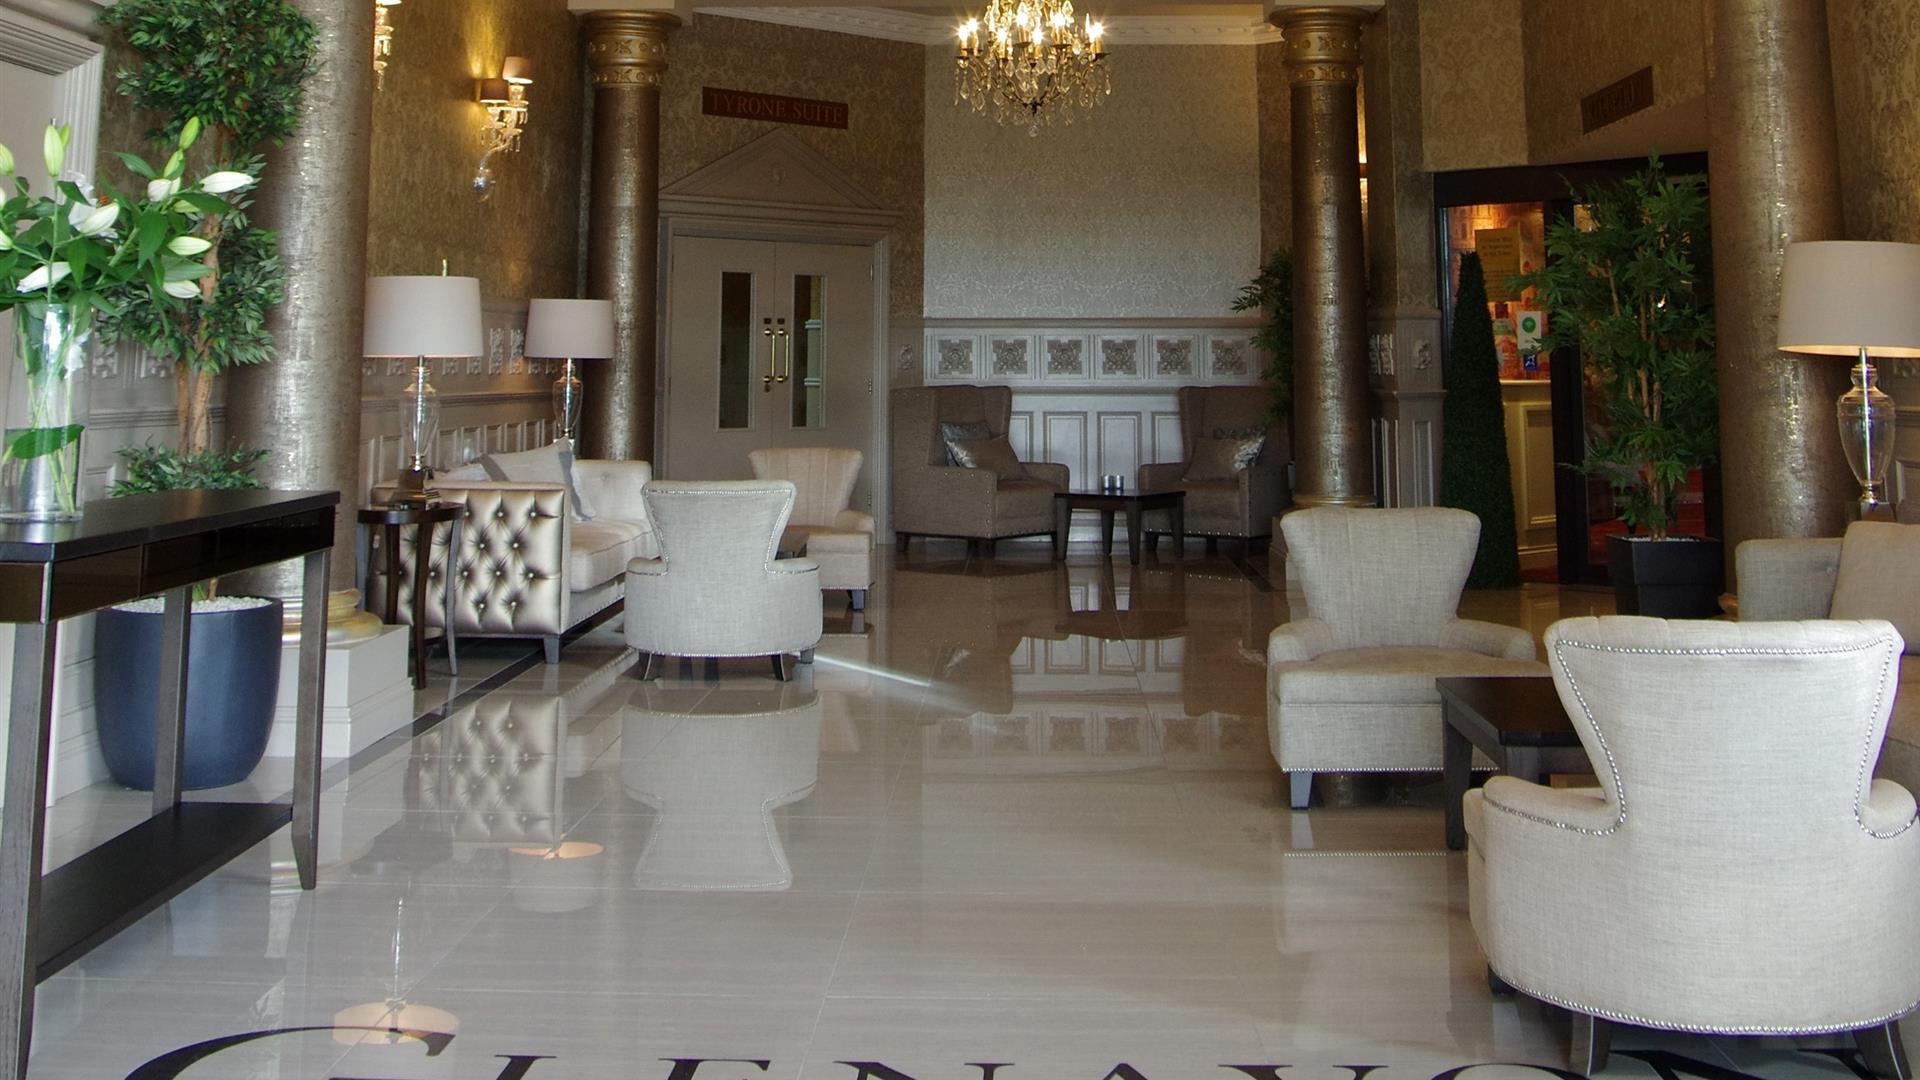 Image of the entrance hall with shiny tiled floors, cream armchairs, gold metallic columns and patterned wallpaper